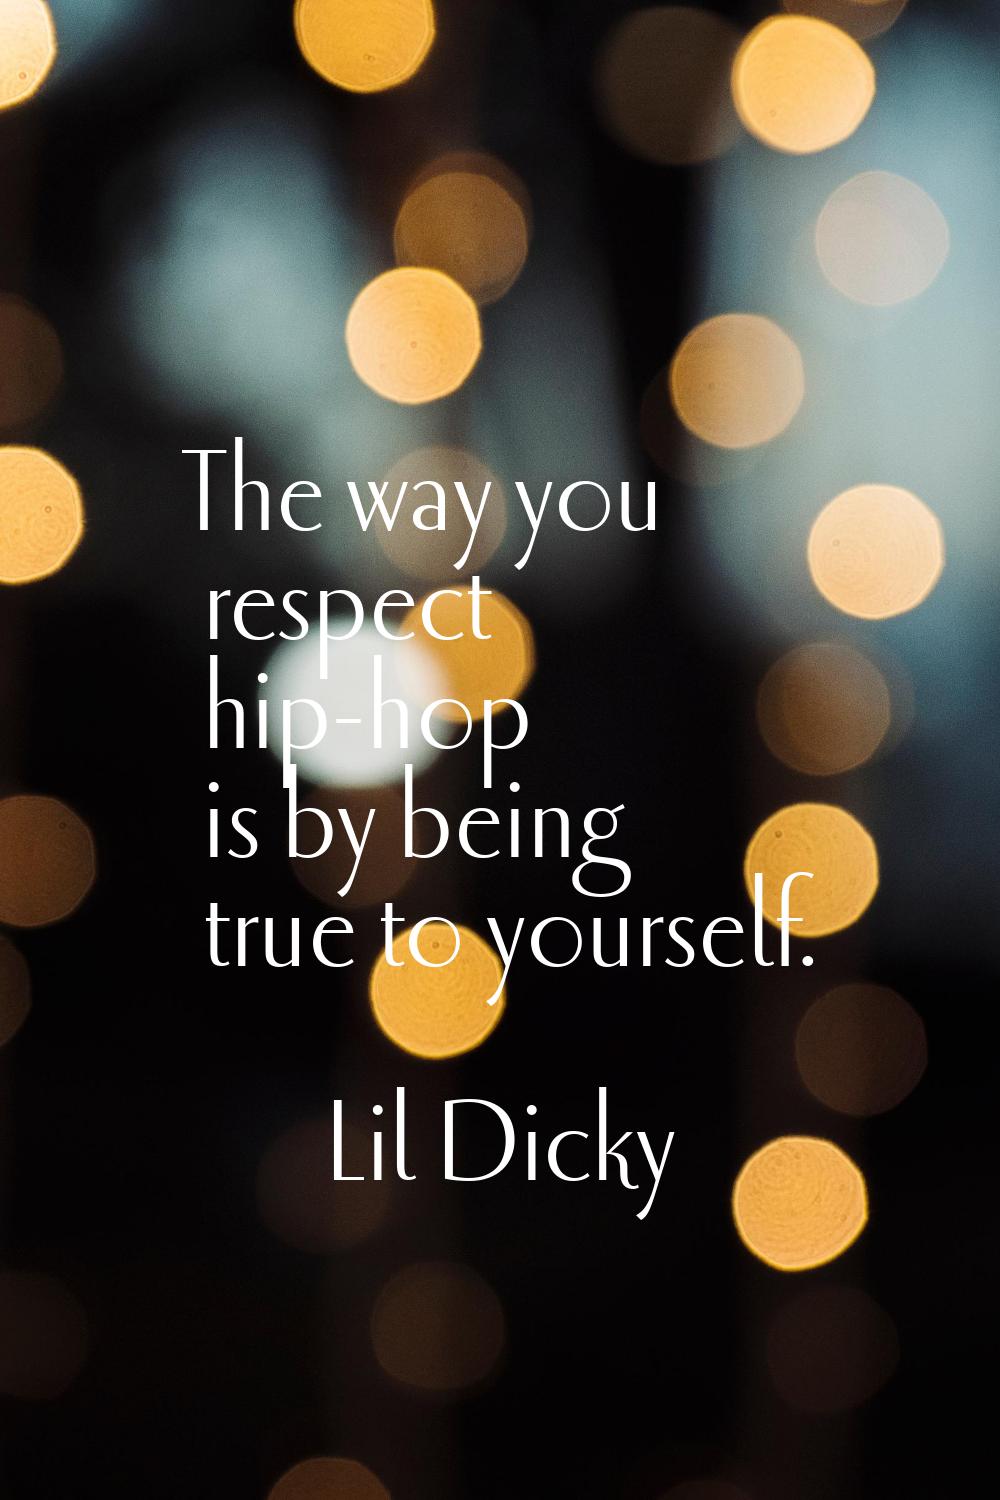 The way you respect hip-hop is by being true to yourself.